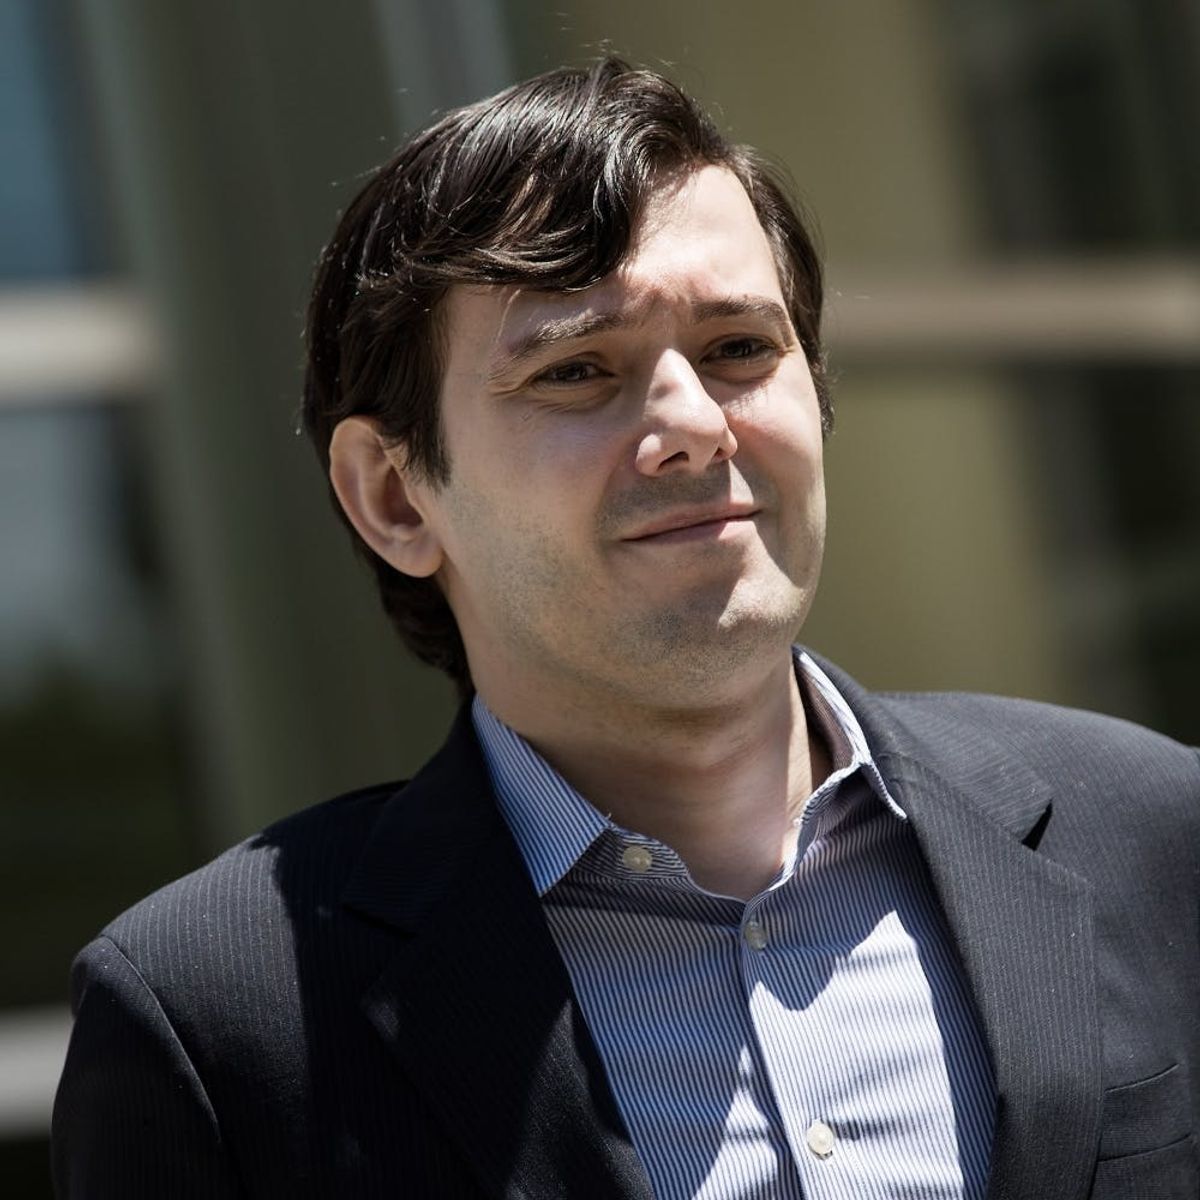 Pharma Bro Martin Shkreli Was Hit in the Face With Poo